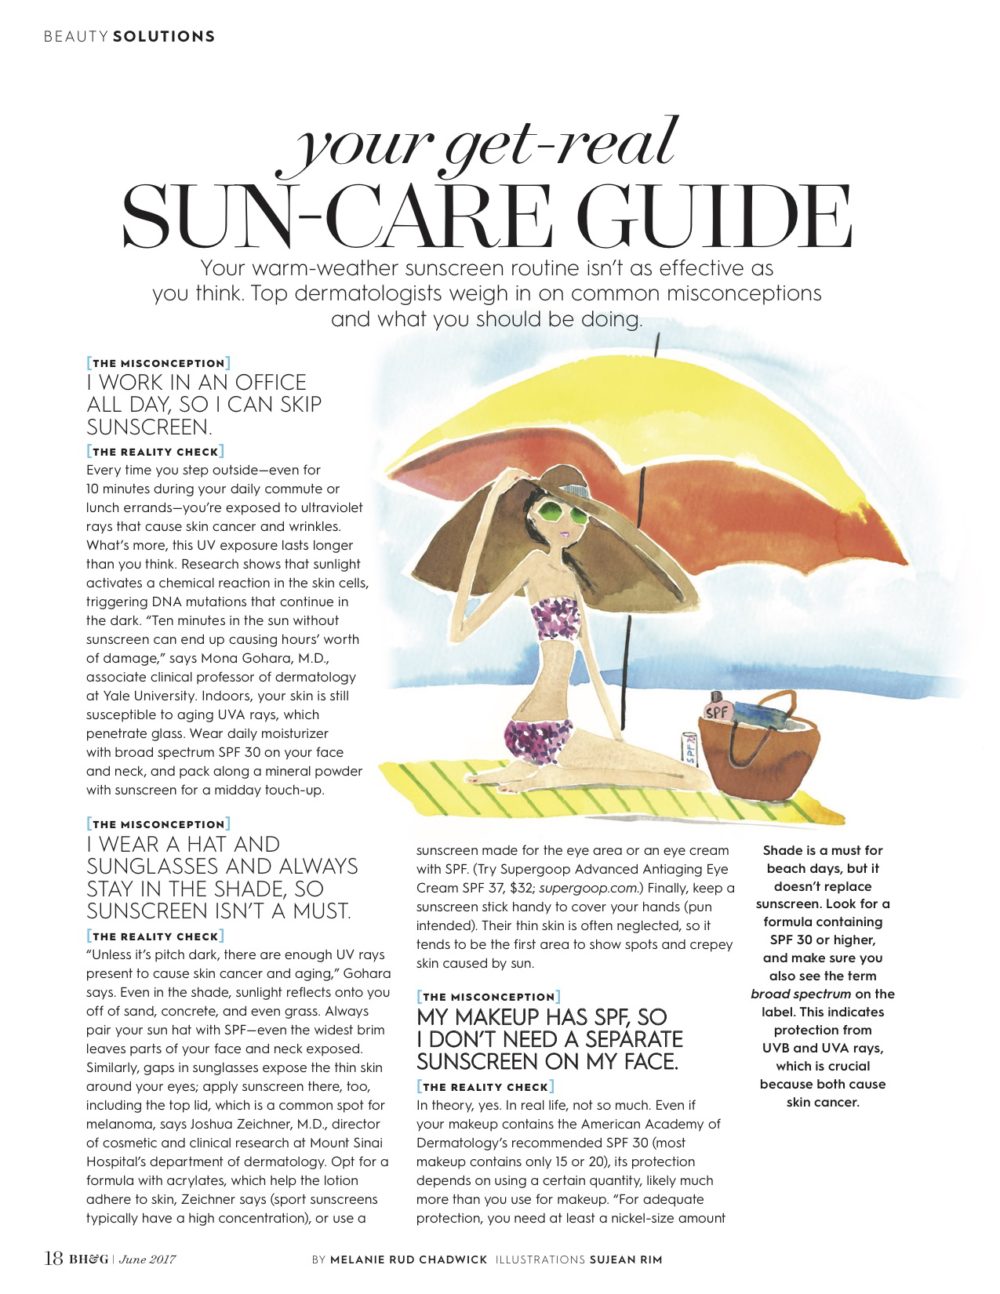 Your Get-Real Sun-Care Guide | Better Homes & Gardens | June '17